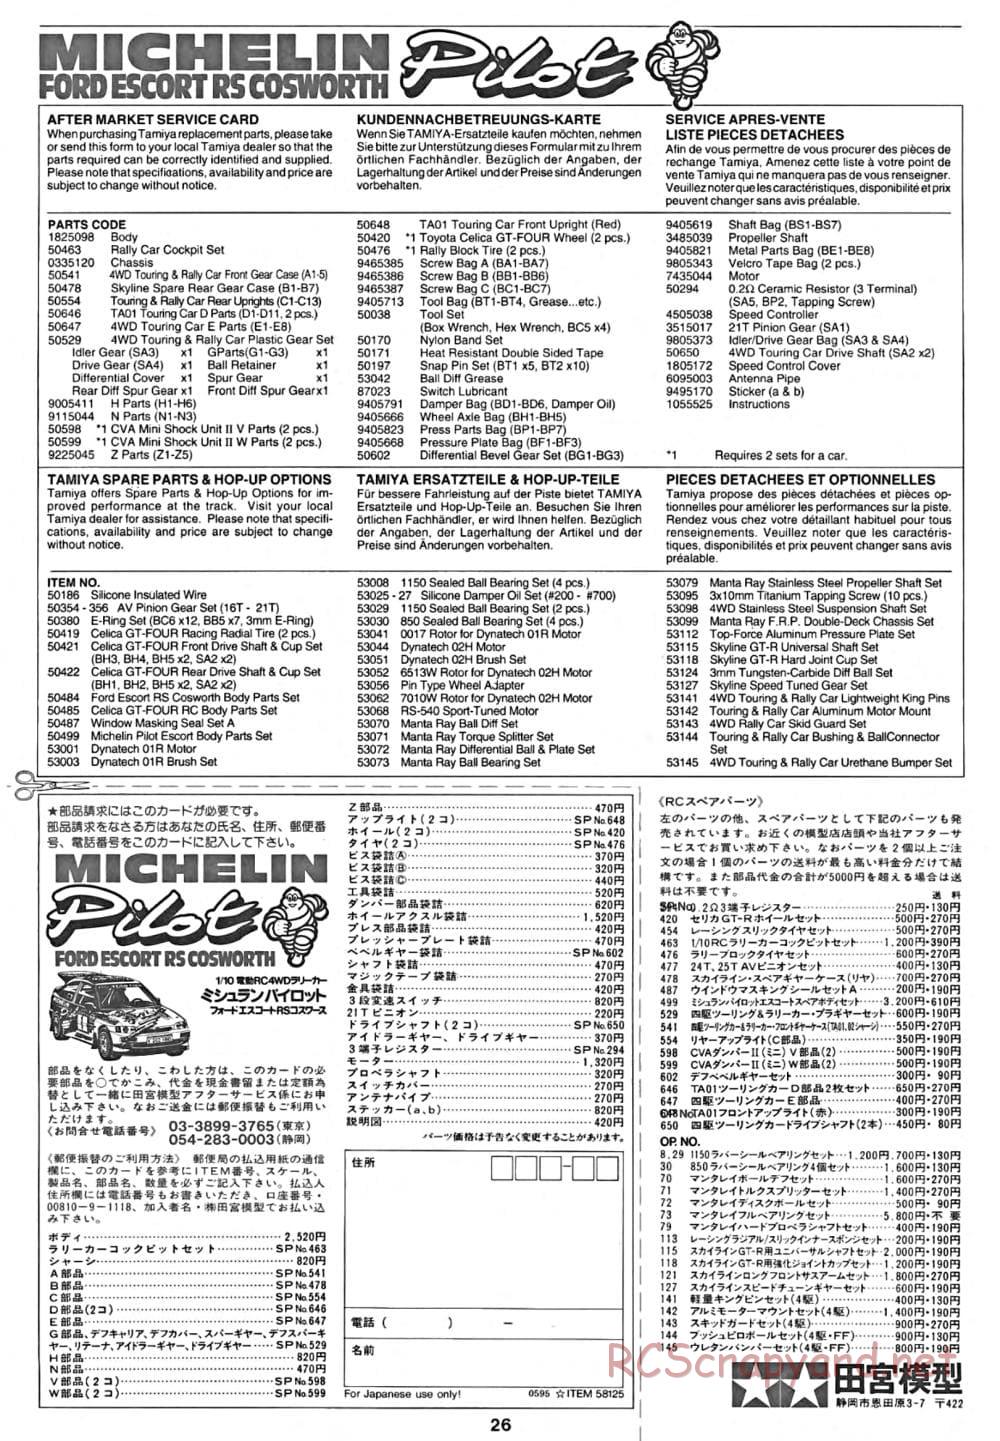 Tamiya - Michelin Pilot Ford Escort RS Cosworth - TA-01 Chassis - Manual - Page 27